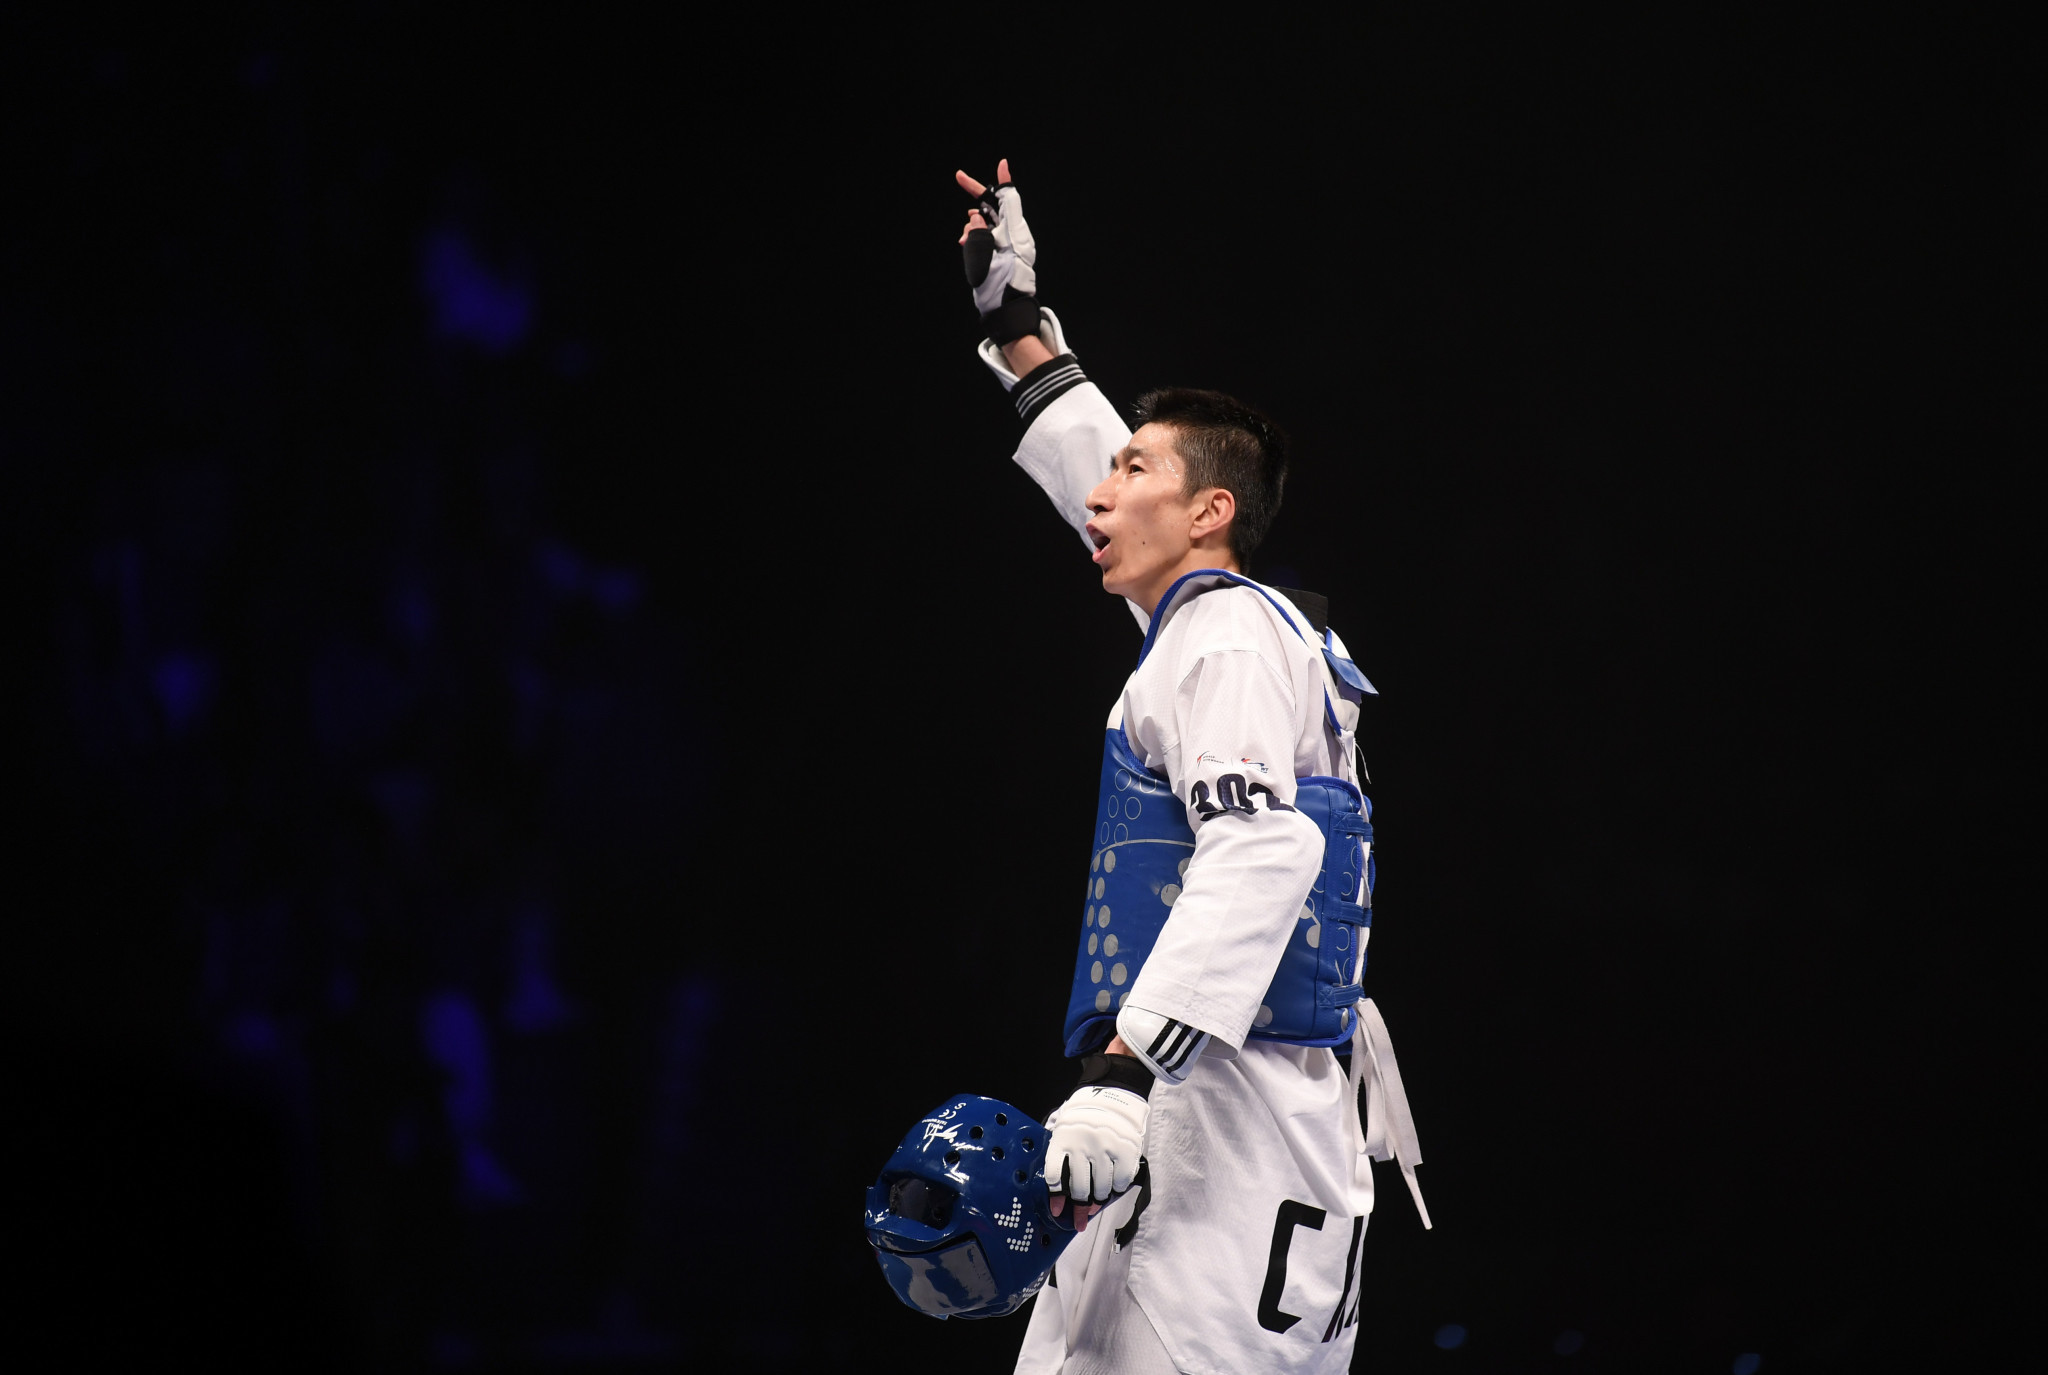 Zhao successfully defends title at World Taekwondo Championships on fruitful final day for China